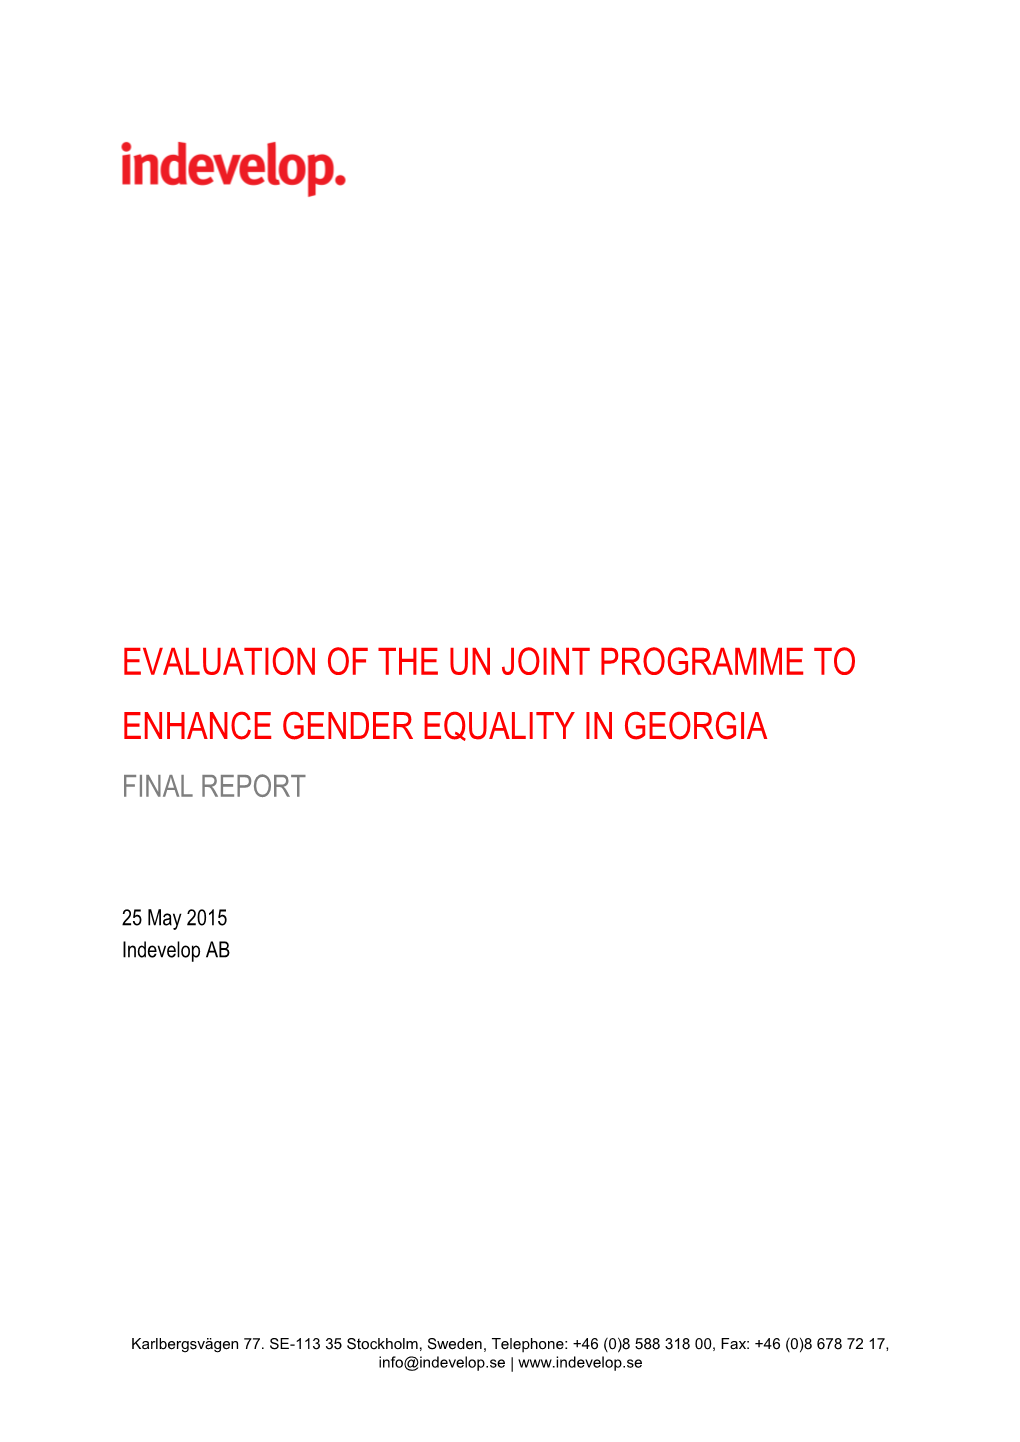 Evaluation of the Un Joint Programme to Enhance Gender Equality in Georgia Final Report